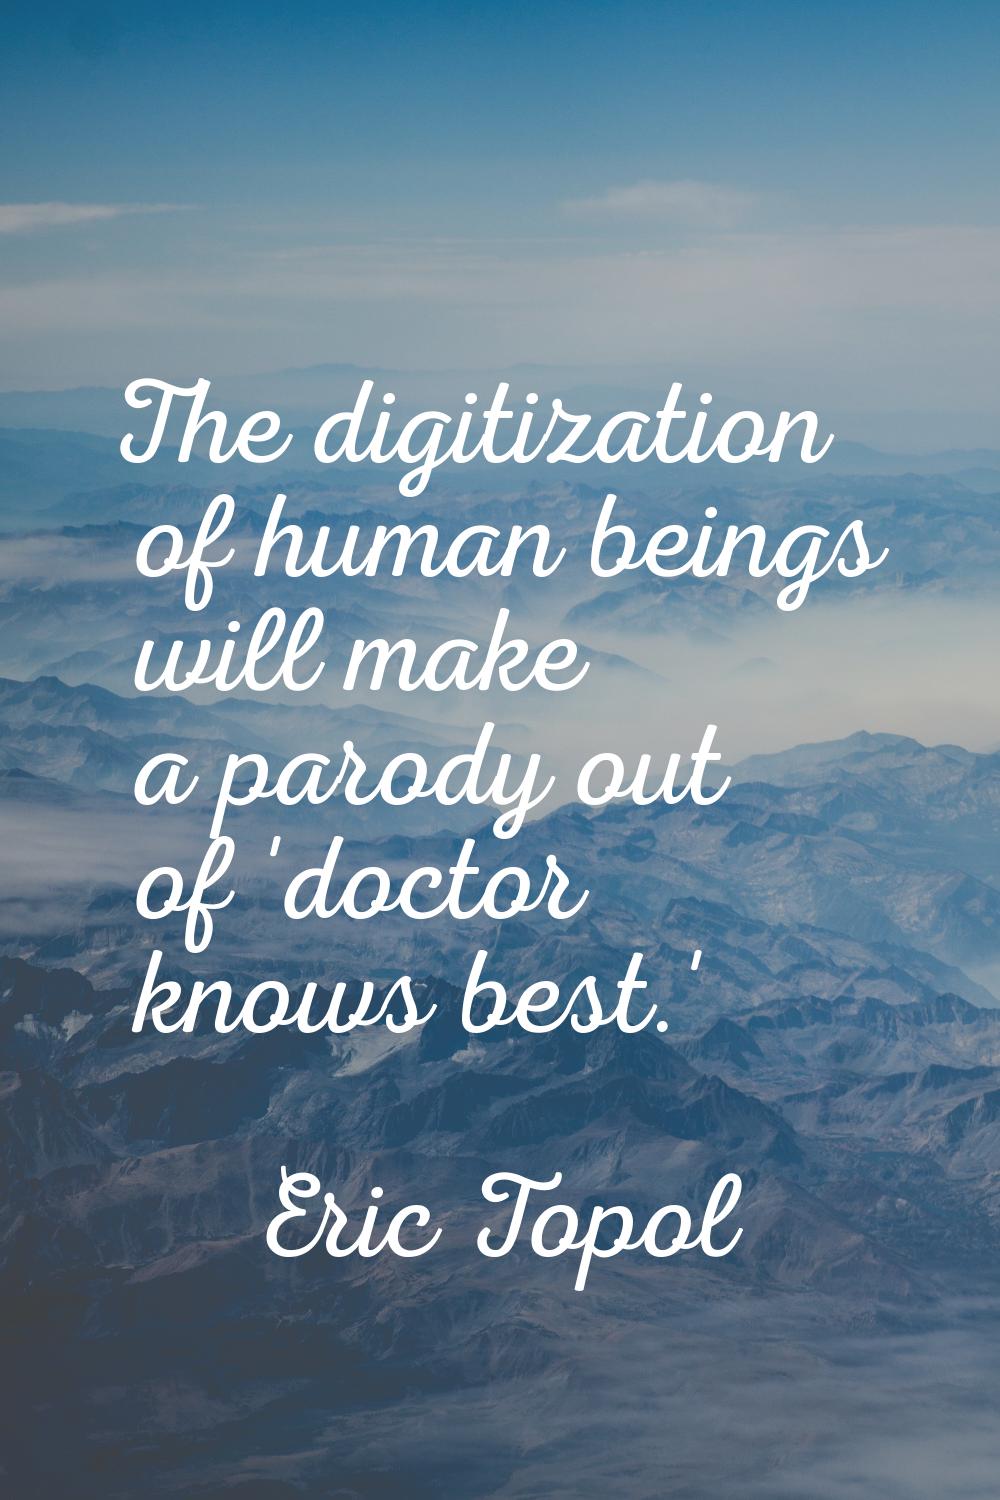 The digitization of human beings will make a parody out of 'doctor knows best.'